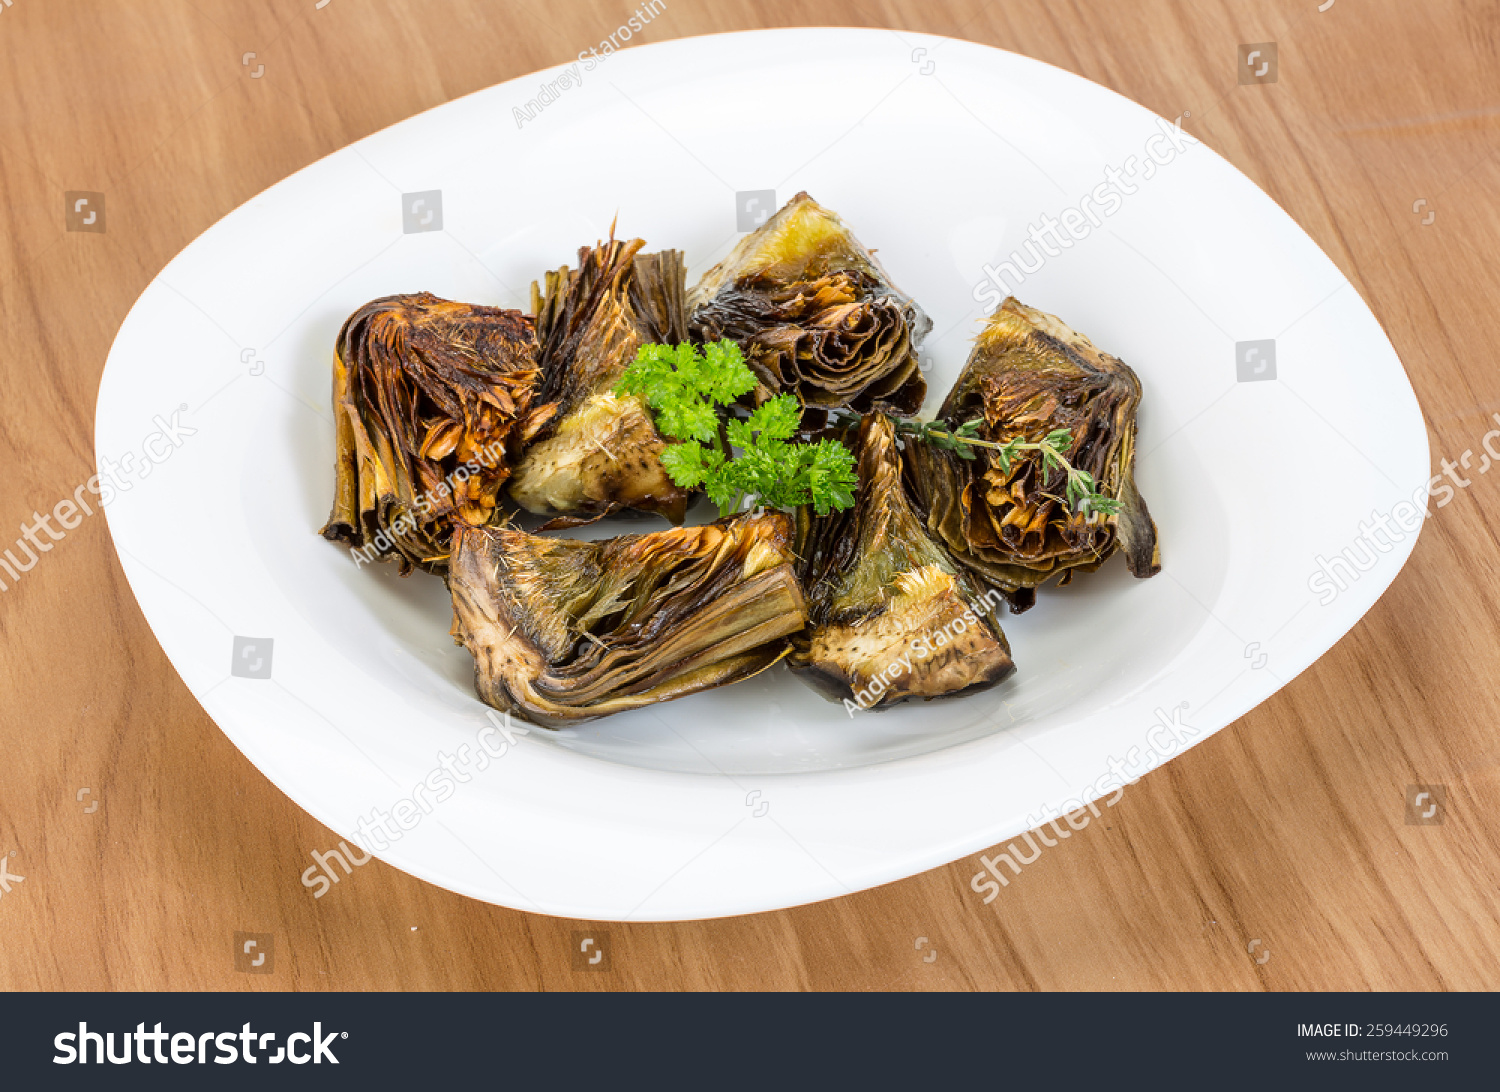 Grilled artishokes with parsley on the wood background #259449296